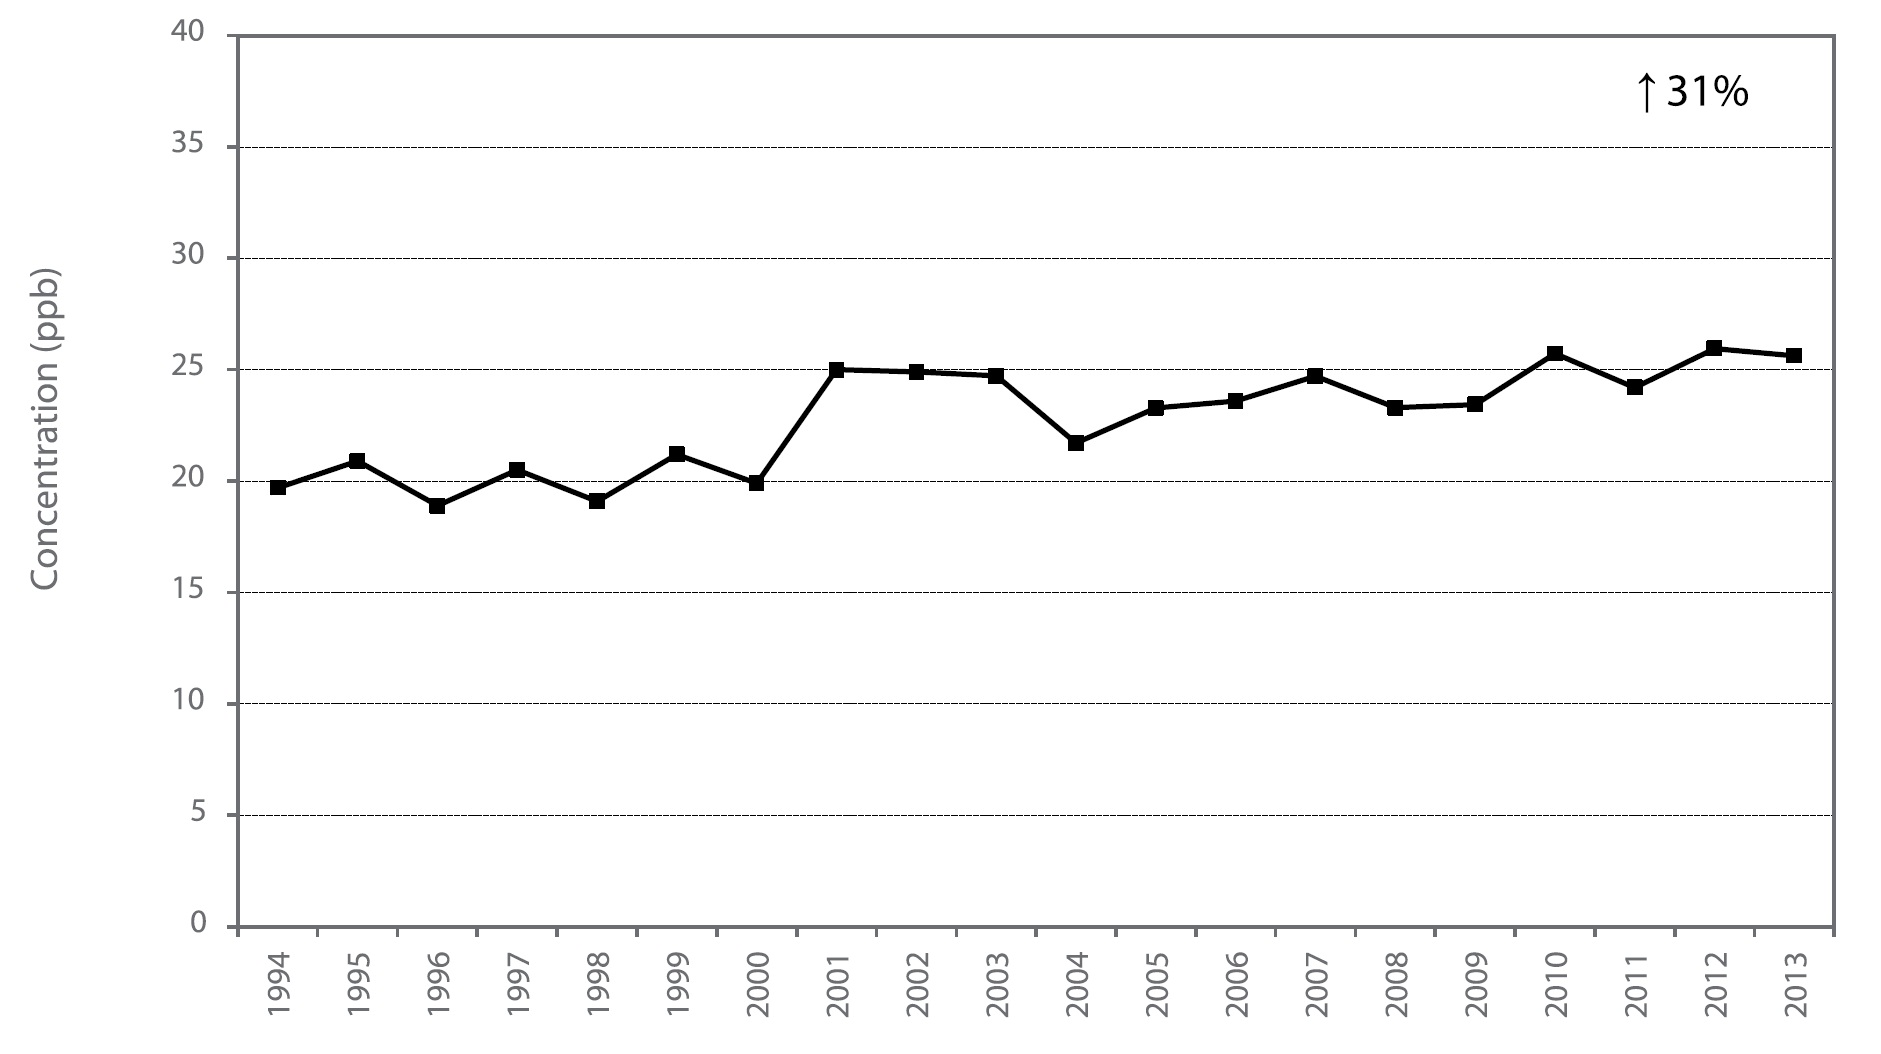 Figure A21 is a line chart displaying the ozone annual mean at Ottawa Downtown from 1994 to 2013. Over this 20-year period, ozone increased 31%.